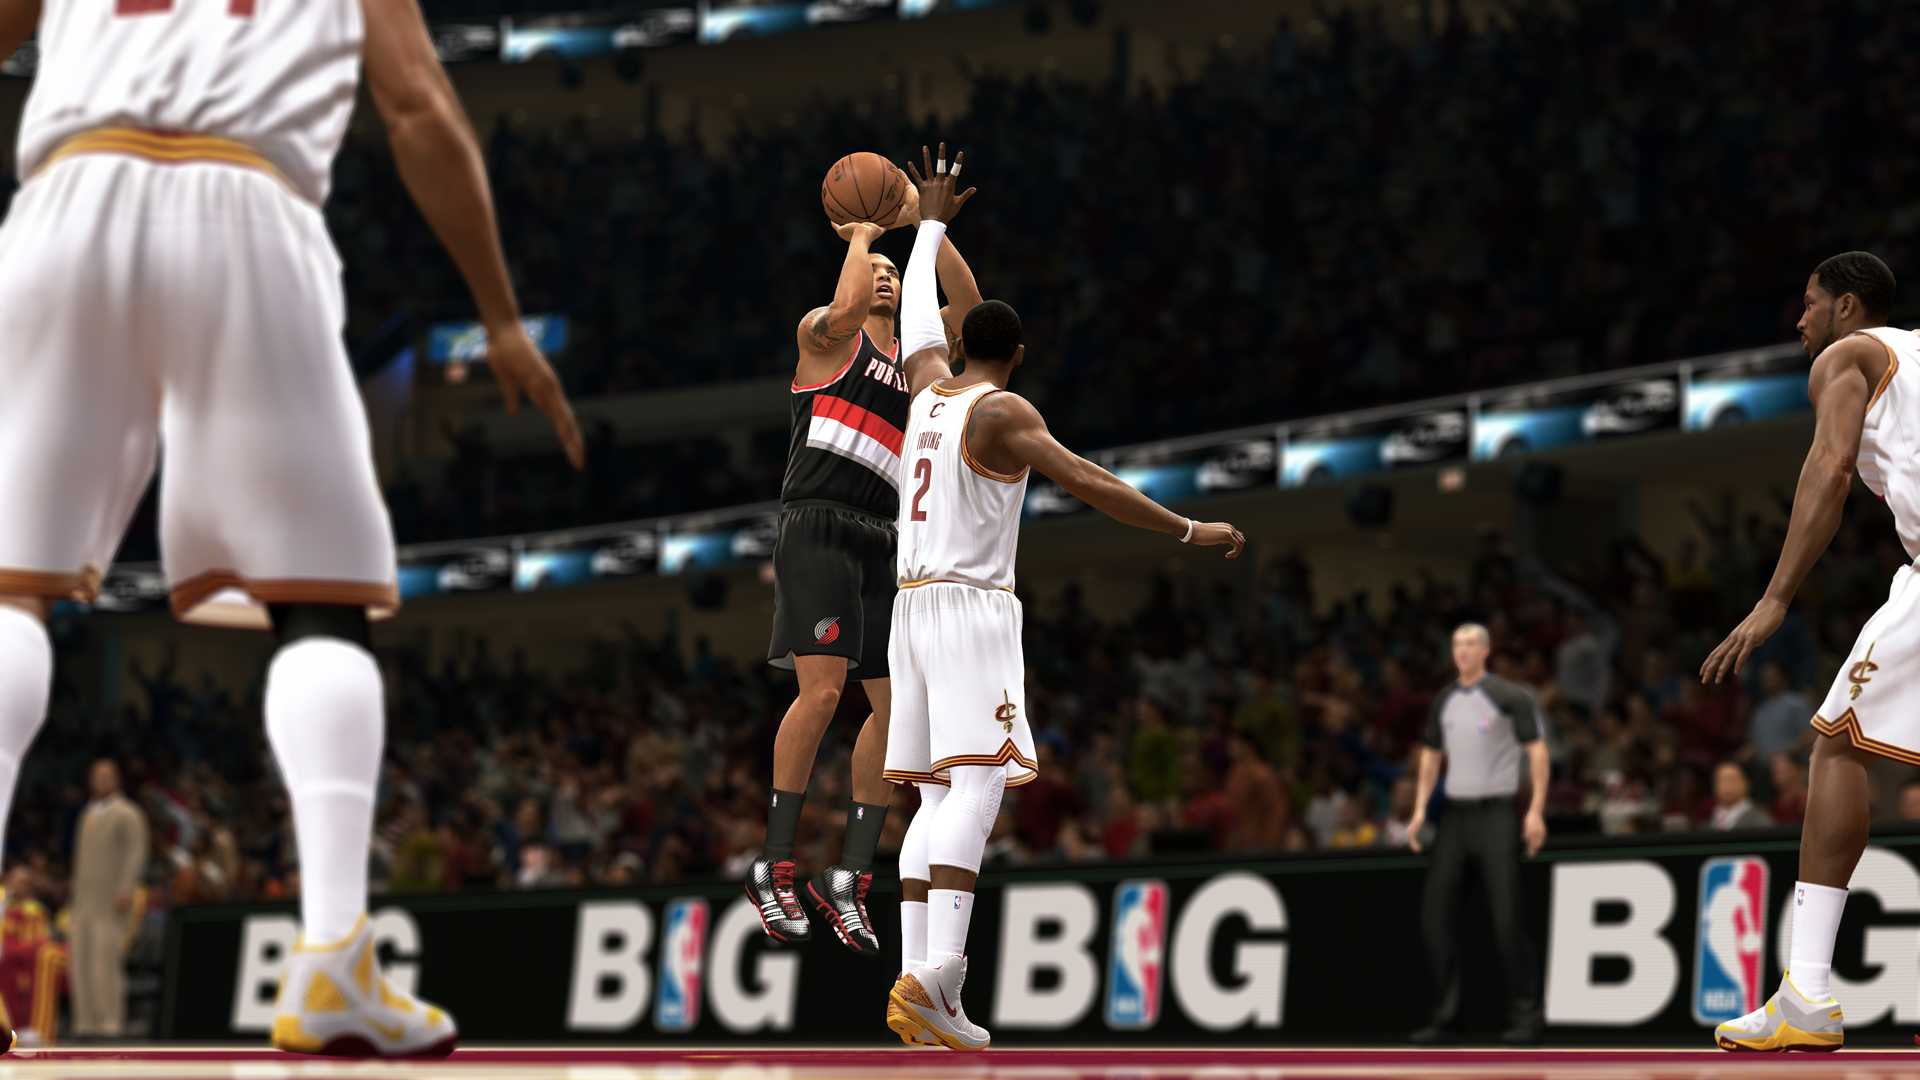 Nba Live 14 Ps4 Release Date